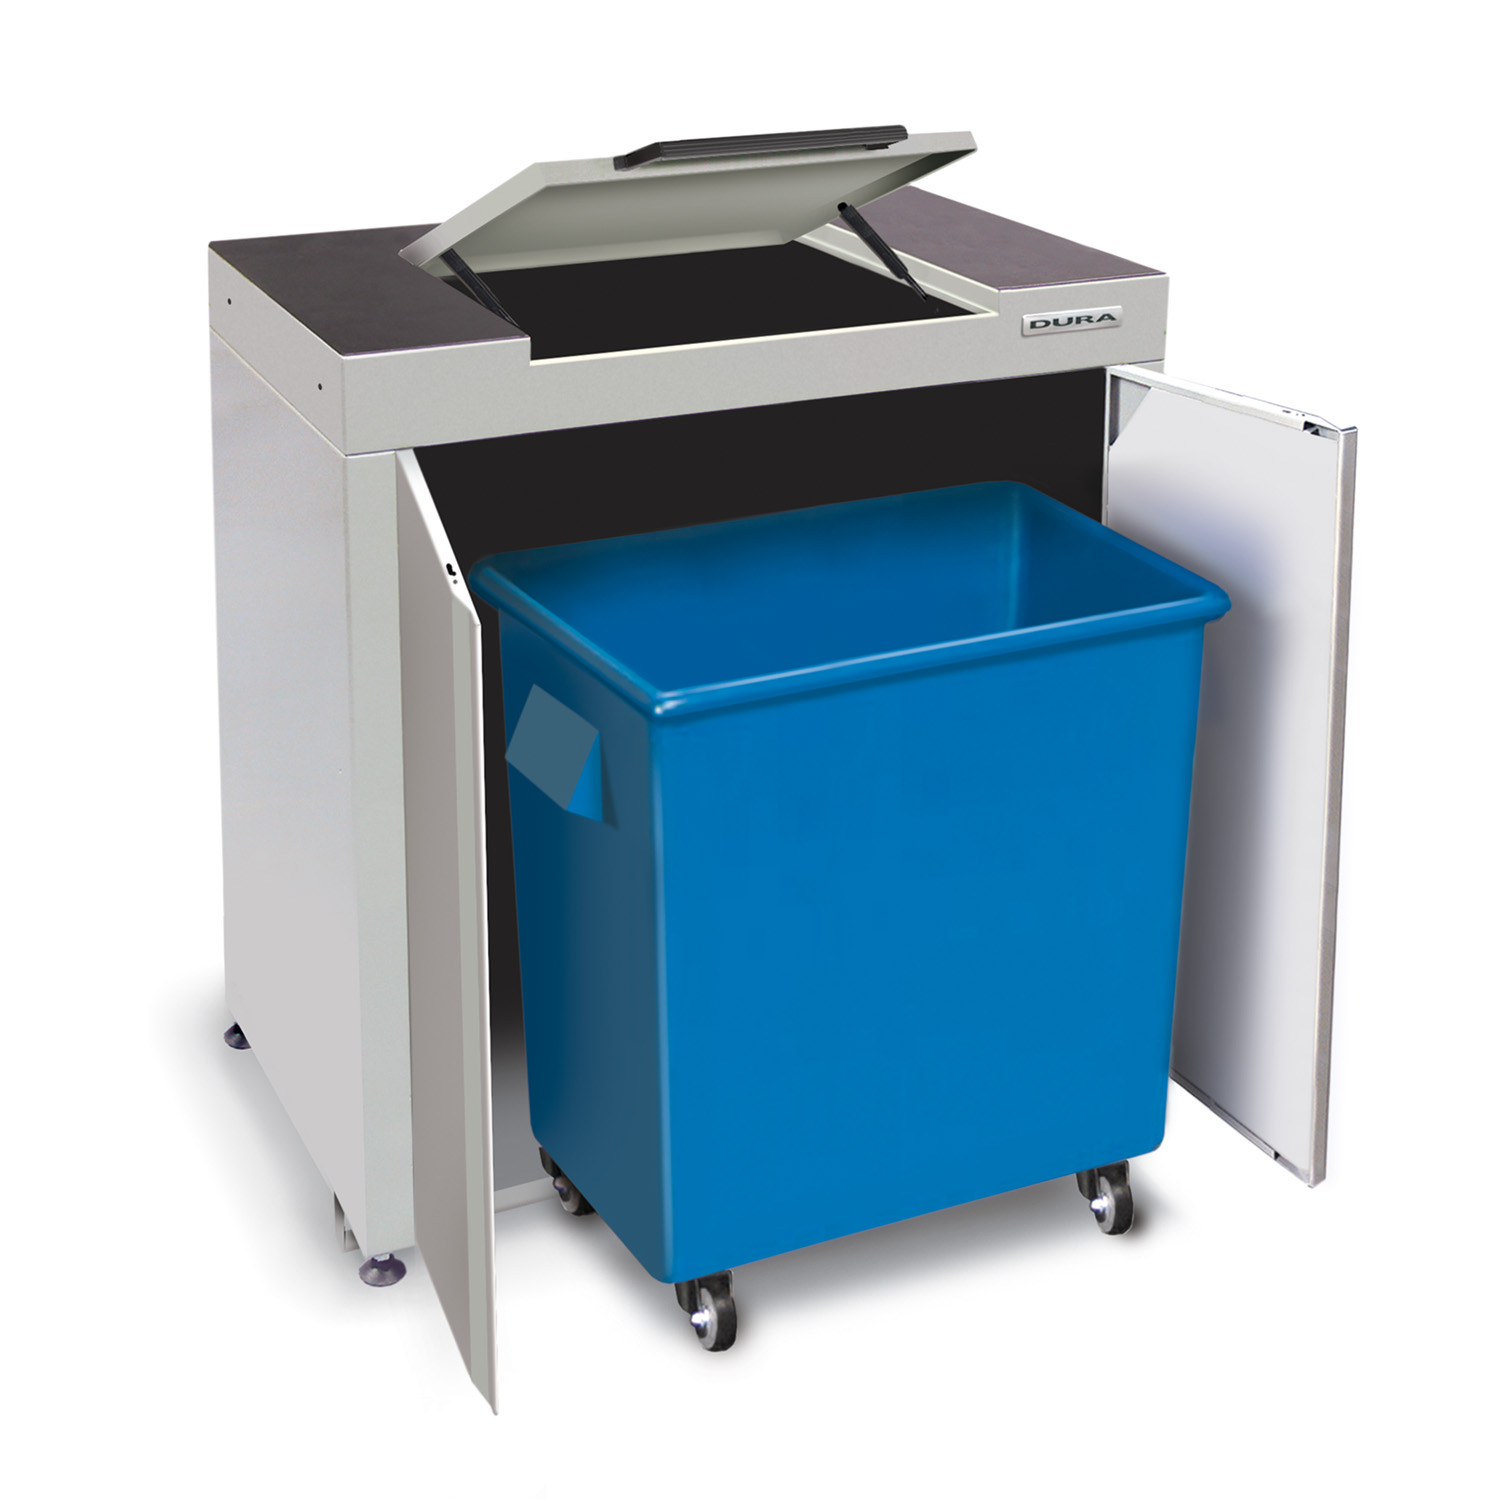 900mm wastebin cabinet with hinged lid